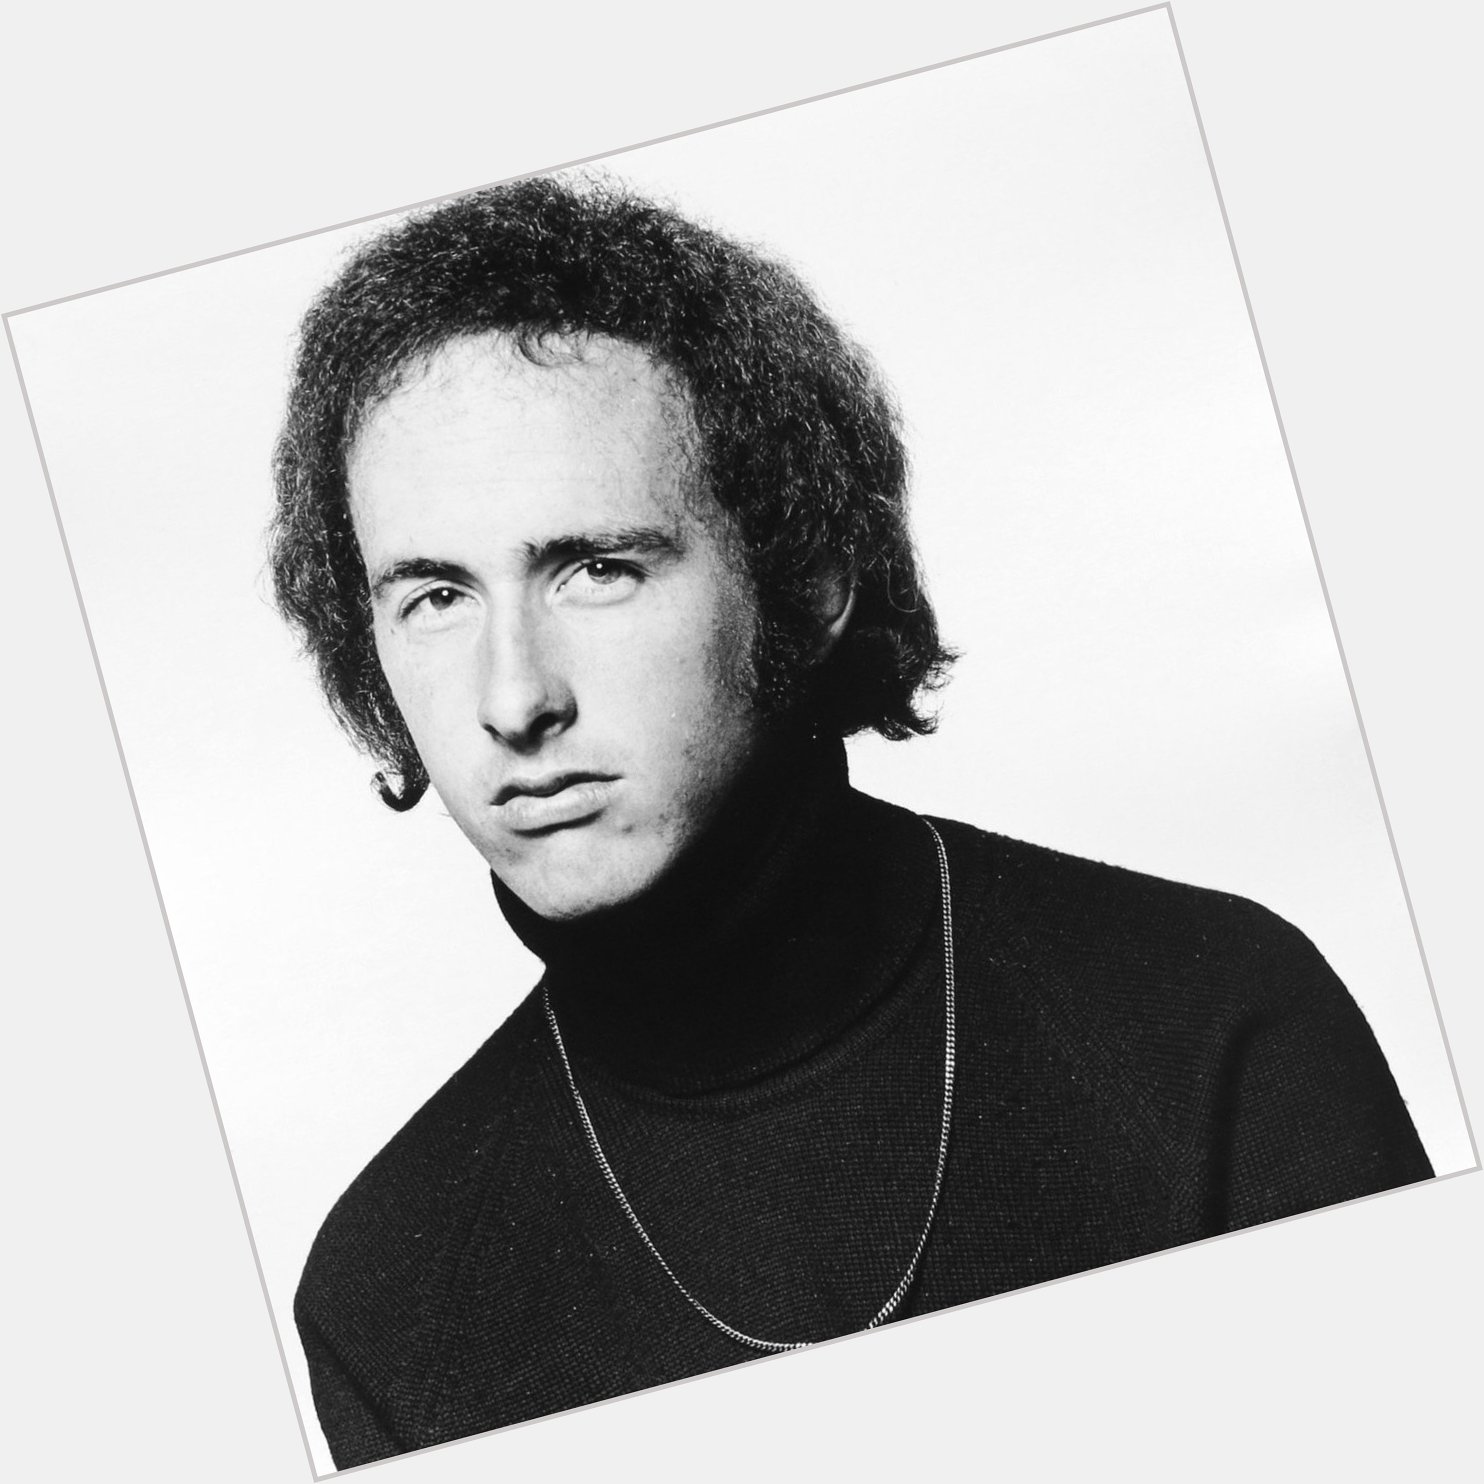 Happy 75th to Robby Krieger of The Doors   